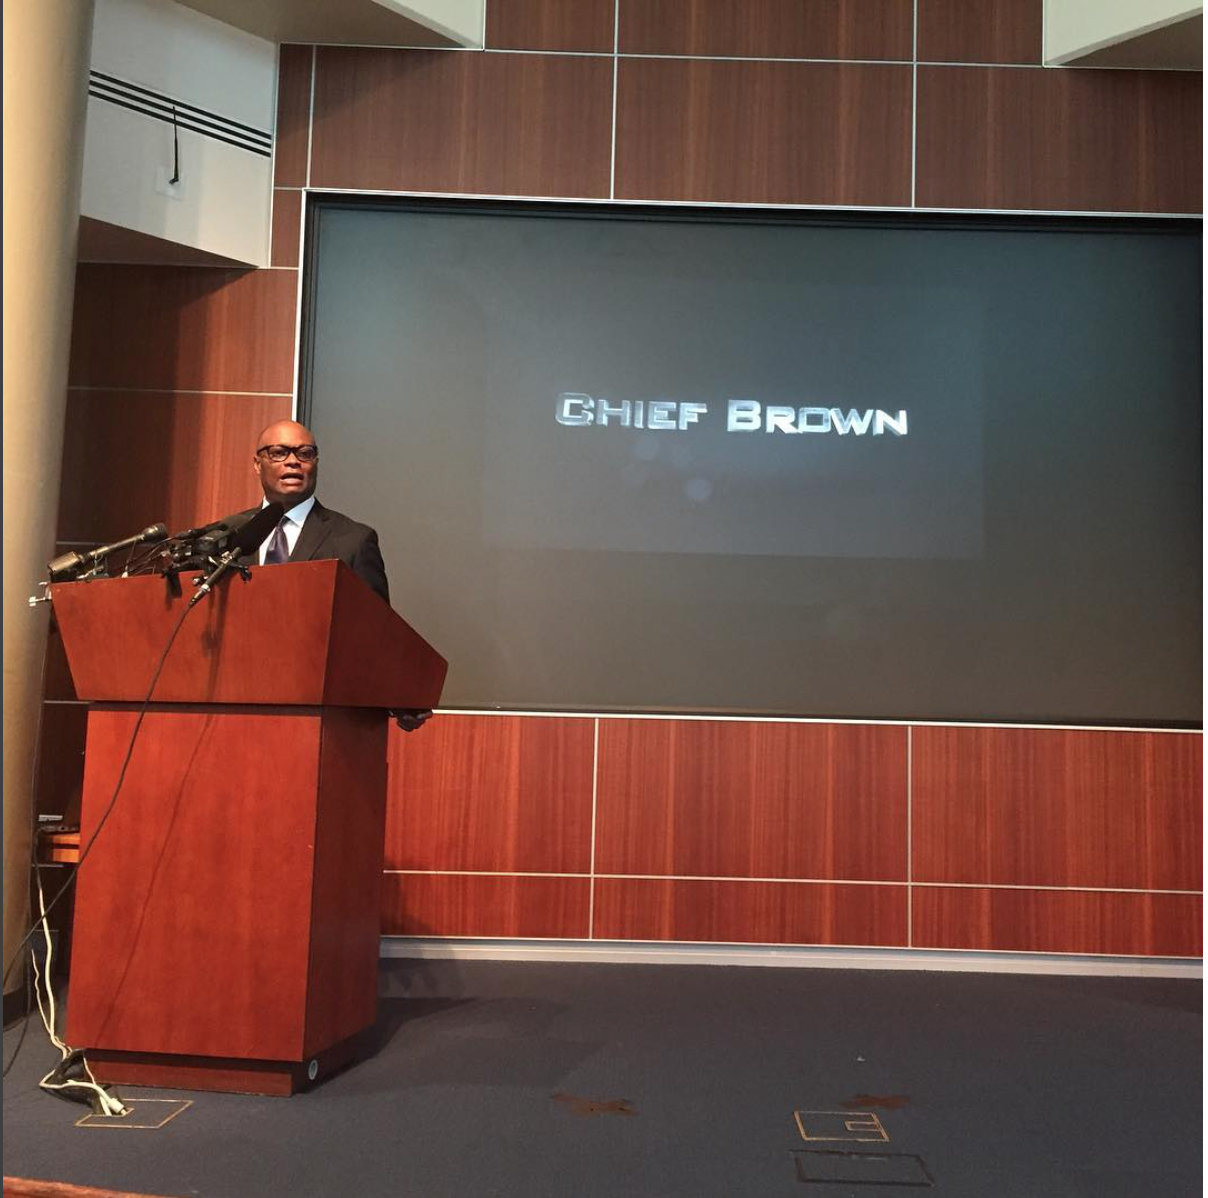   Dallas, TX. Chief Brown speaks to the media about his retirement after 33 years of service with the Dallas Police Department.&nbsp; #dpd &nbsp;&nbsp; #dallaspd &nbsp;&nbsp; #dallasstrong &nbsp; #SnapshotLives   